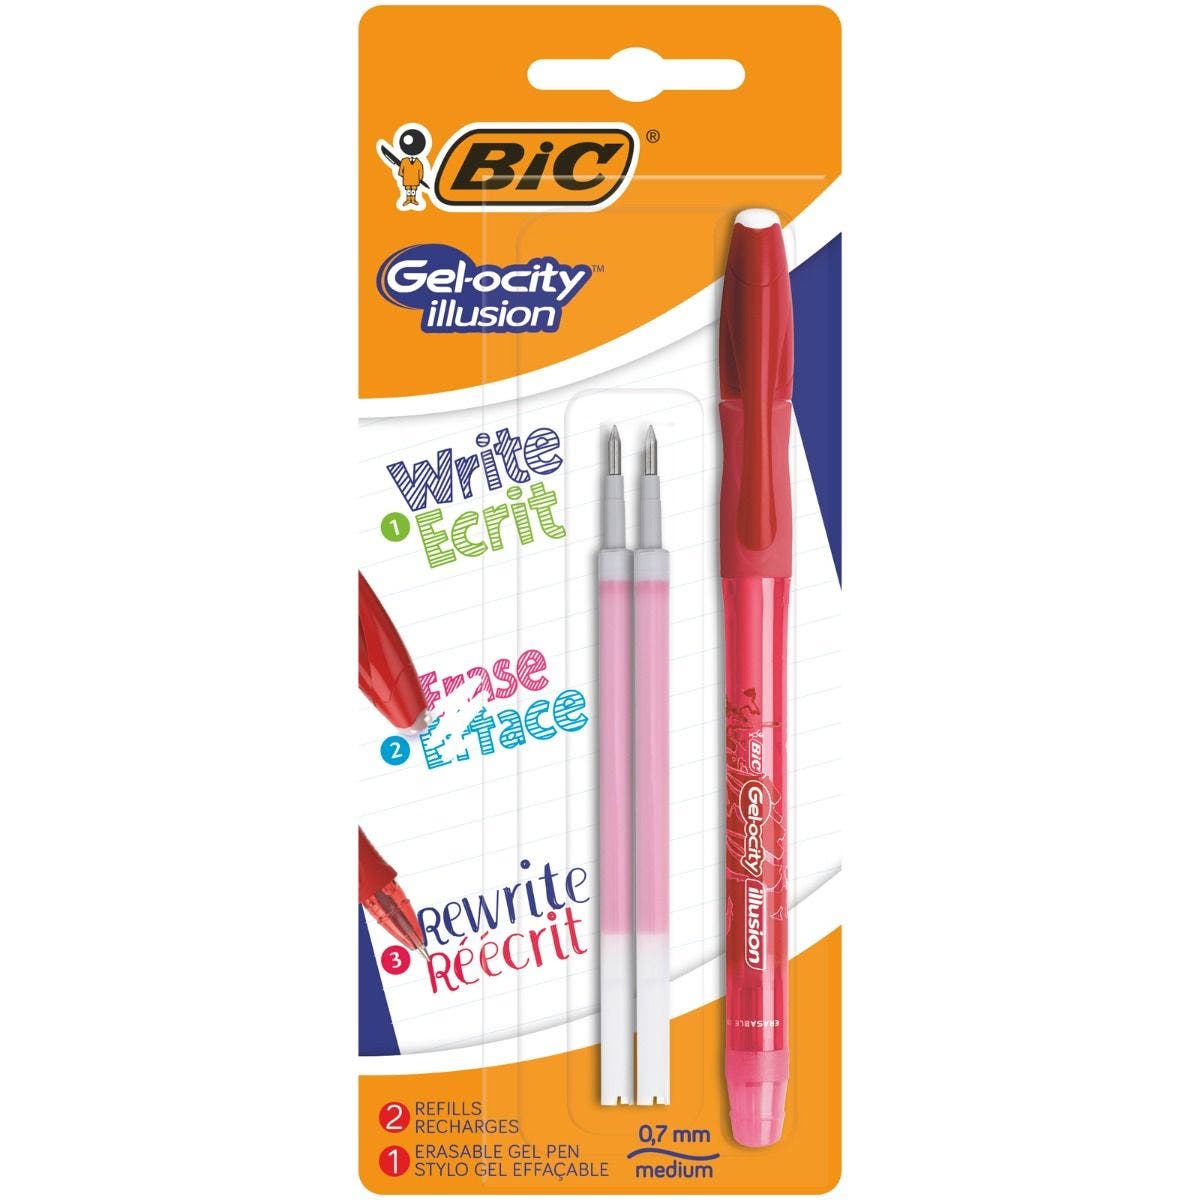 Stylo gel rétractable rouge - MFDIFFUSION